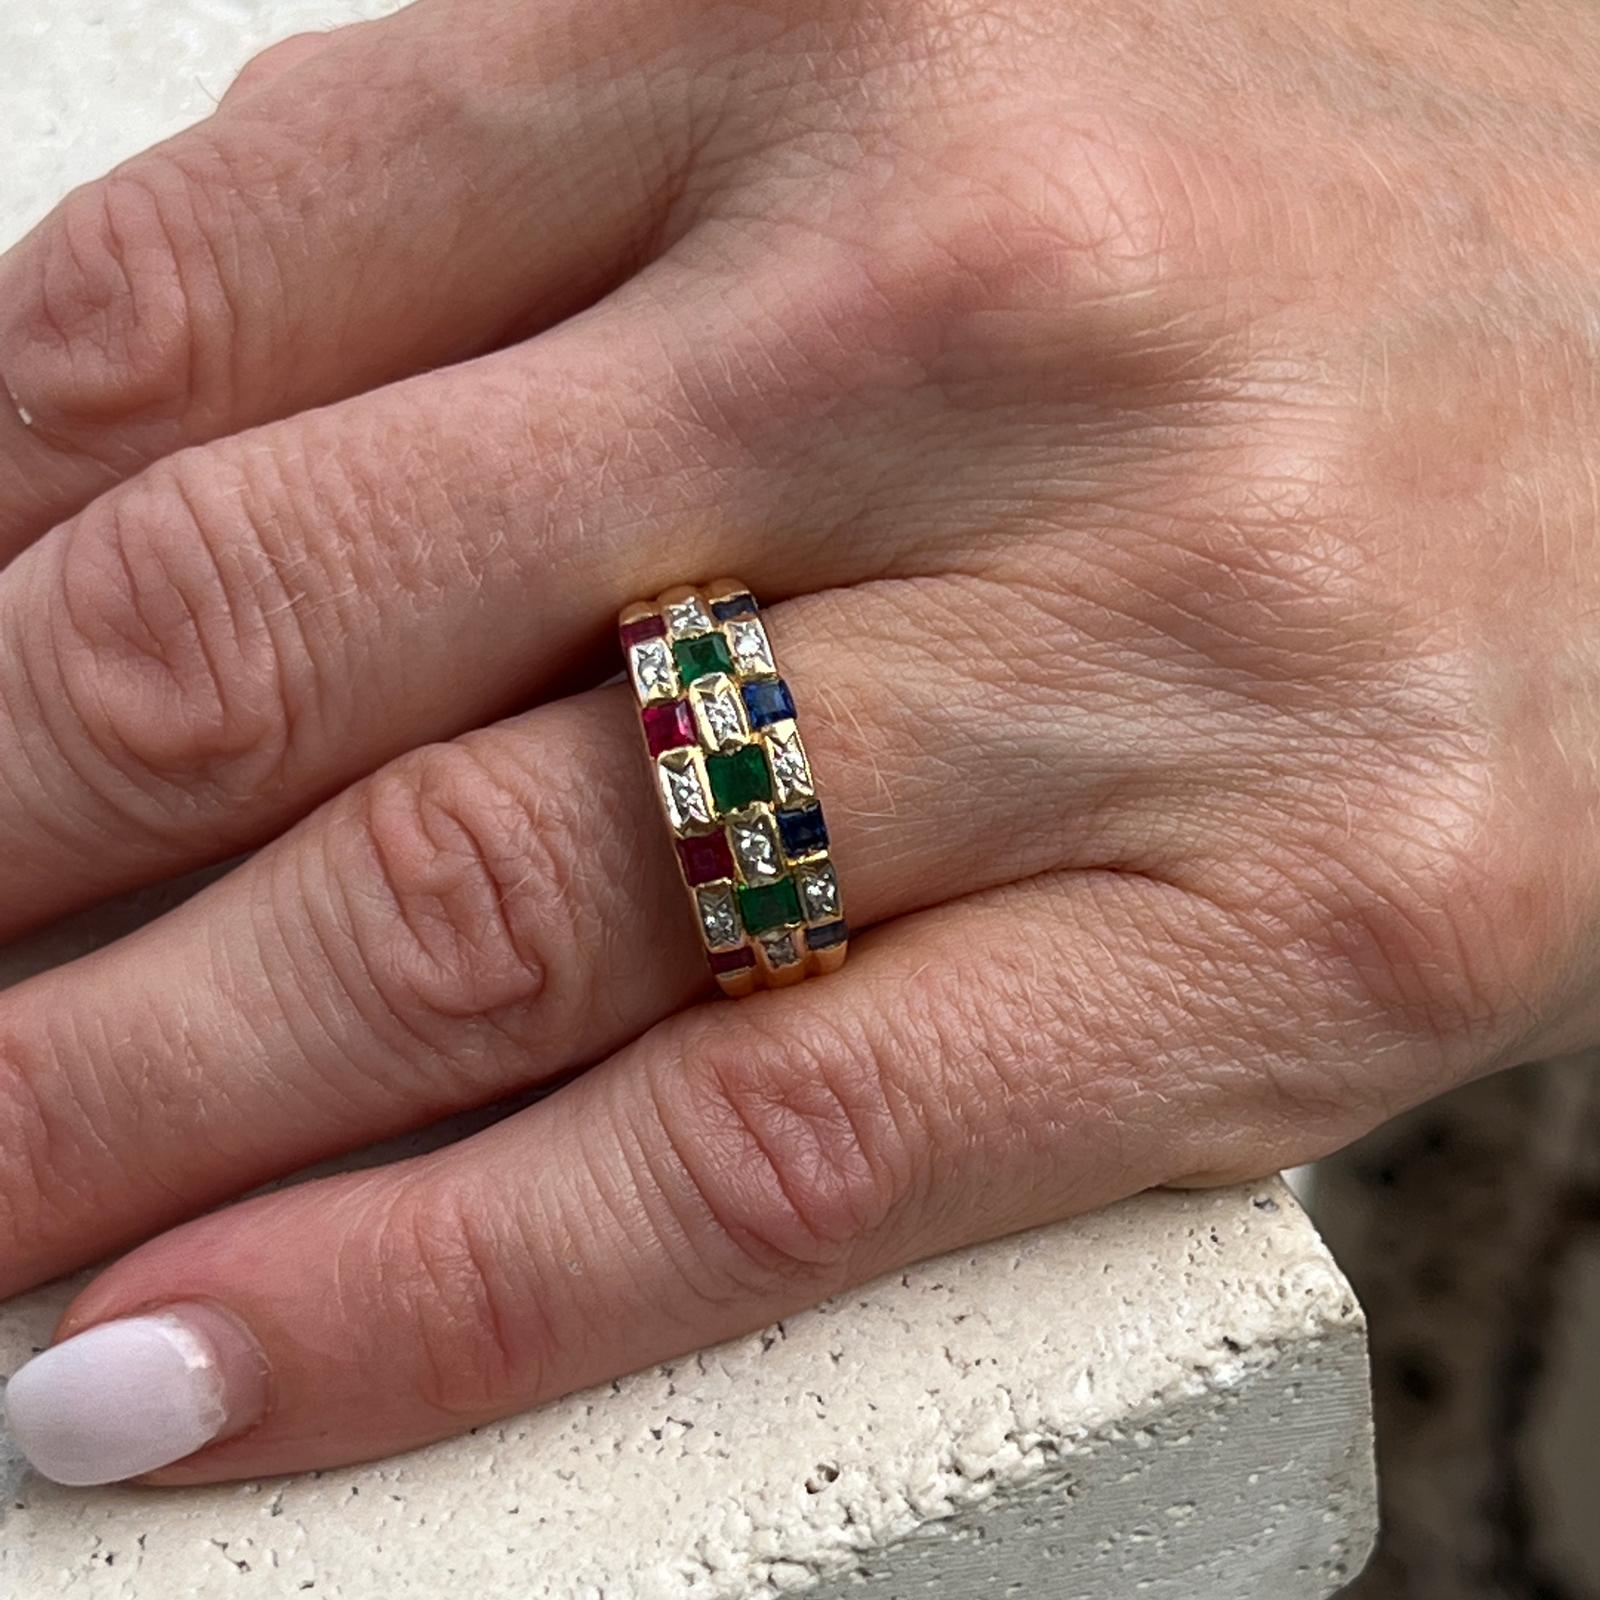 Diamond and colorful precious gemstone checkerboard ring crafted in 18 karat yellow gold. The ring features diamonds, rubies, sapphires, and emeralds. The 10 round briliant cut diamonds weigh approximately .10 CTW. The band measures 8mm in width and